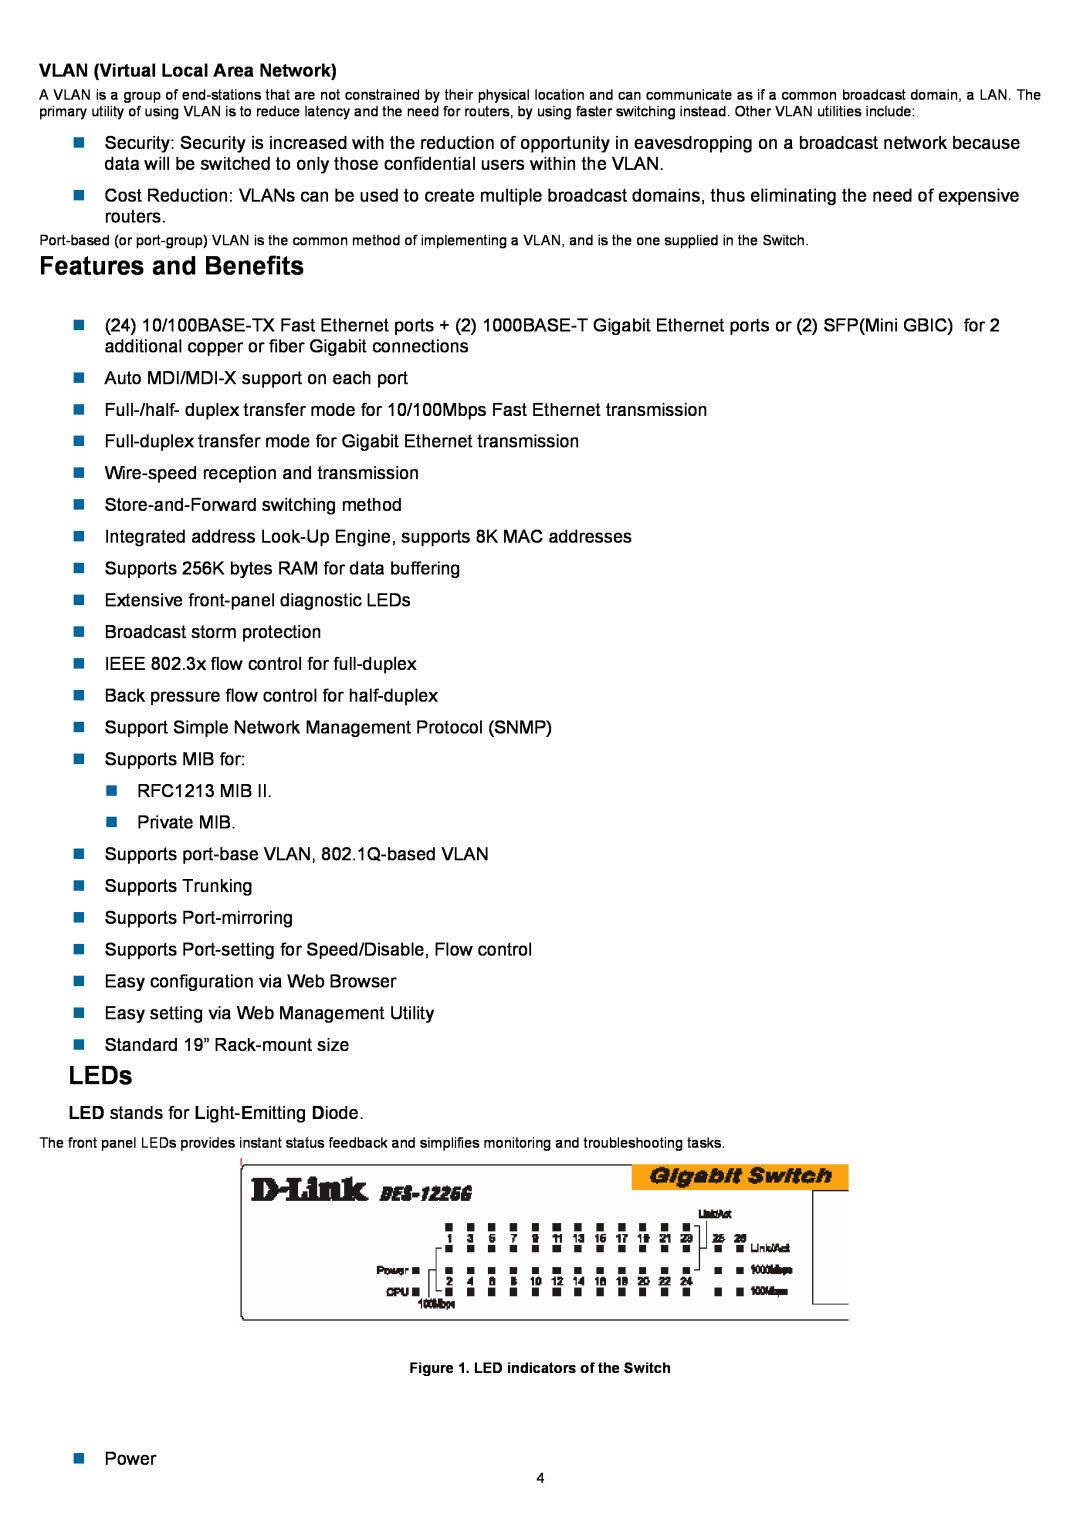 D-Link DES-1226G manual Features and Benefits, LEDs, VLAN Virtual Local Area Network 